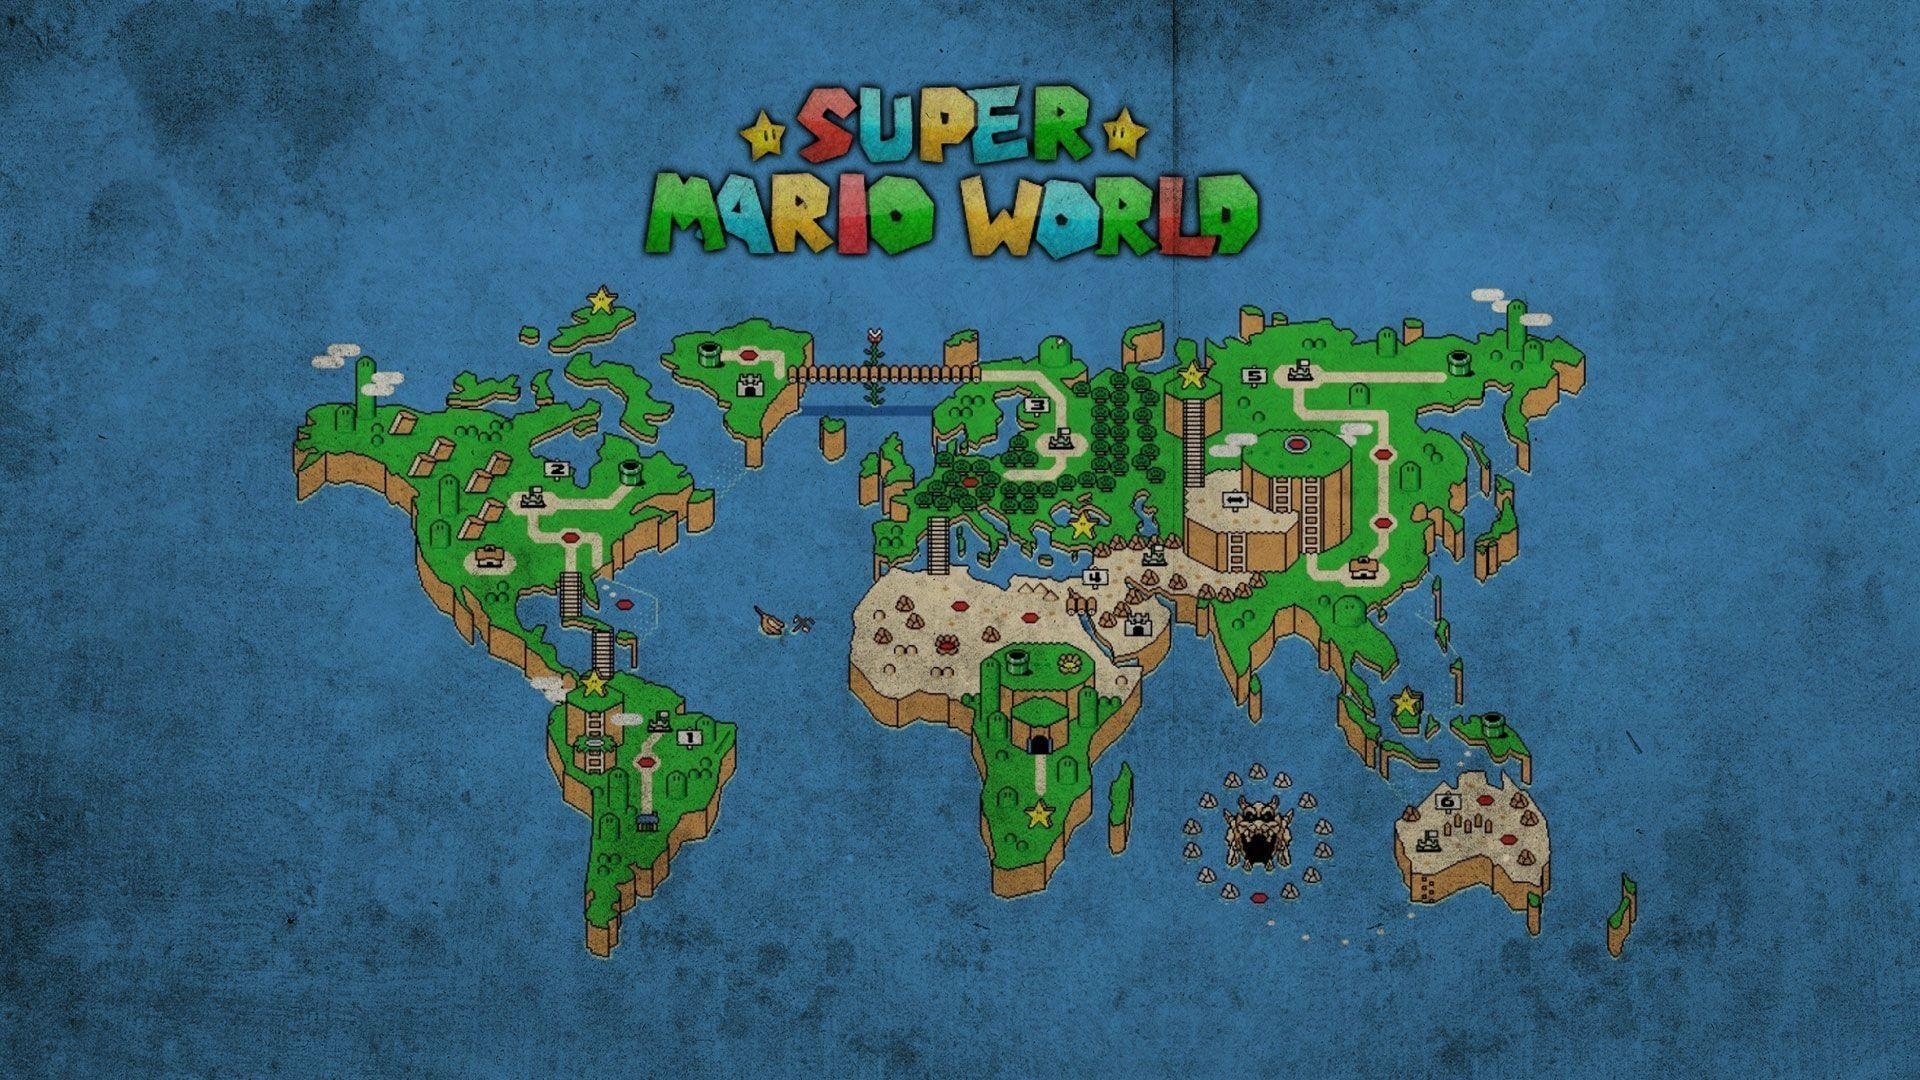 10 Top Super Mario World Wallpaper 1080P FULL HD 1920×1080 For PC Background